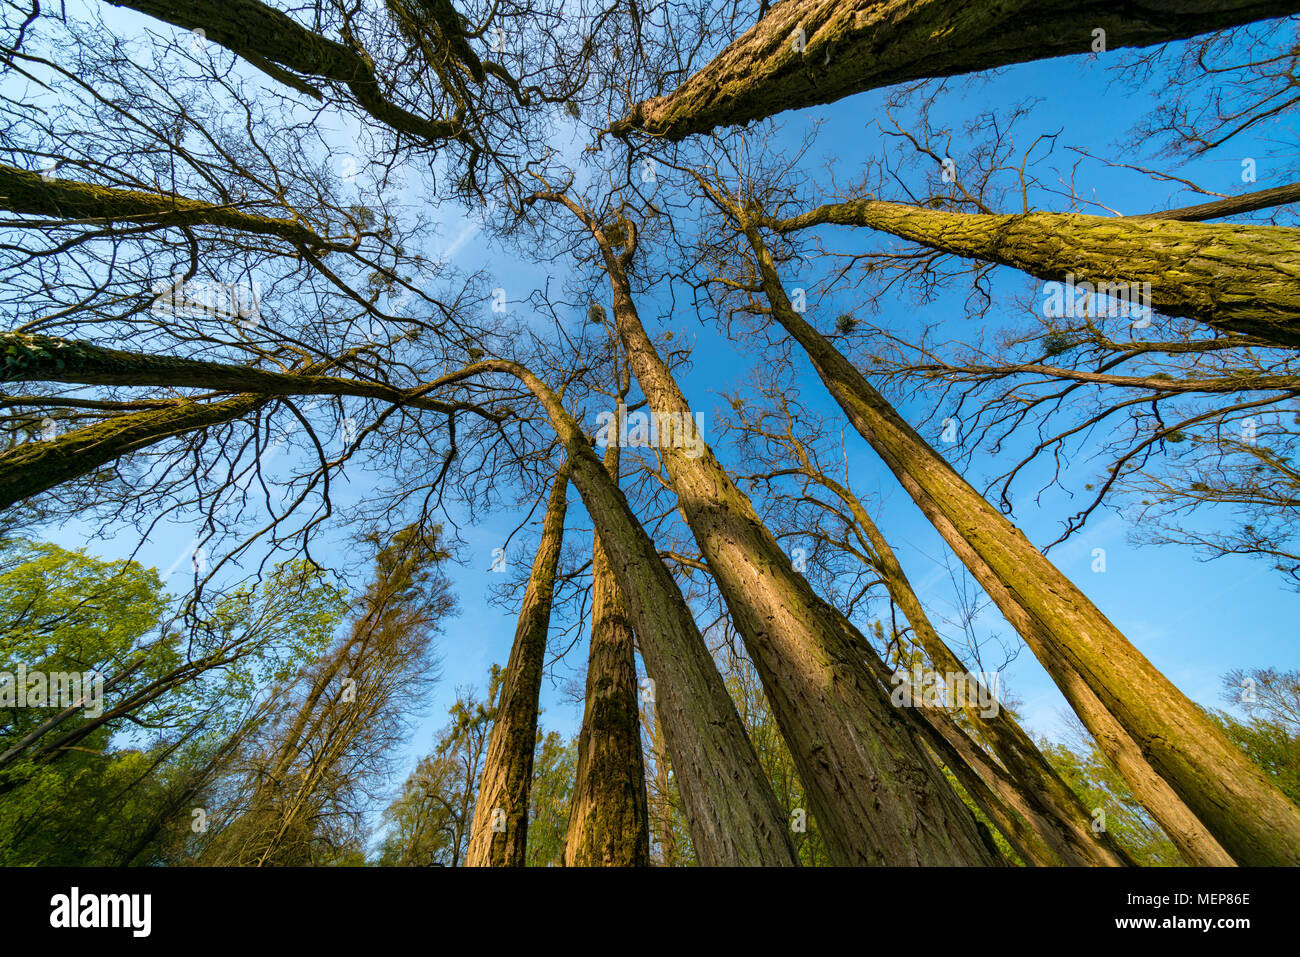 Looking up trees low angle view of tree branches and sky Stock Photo